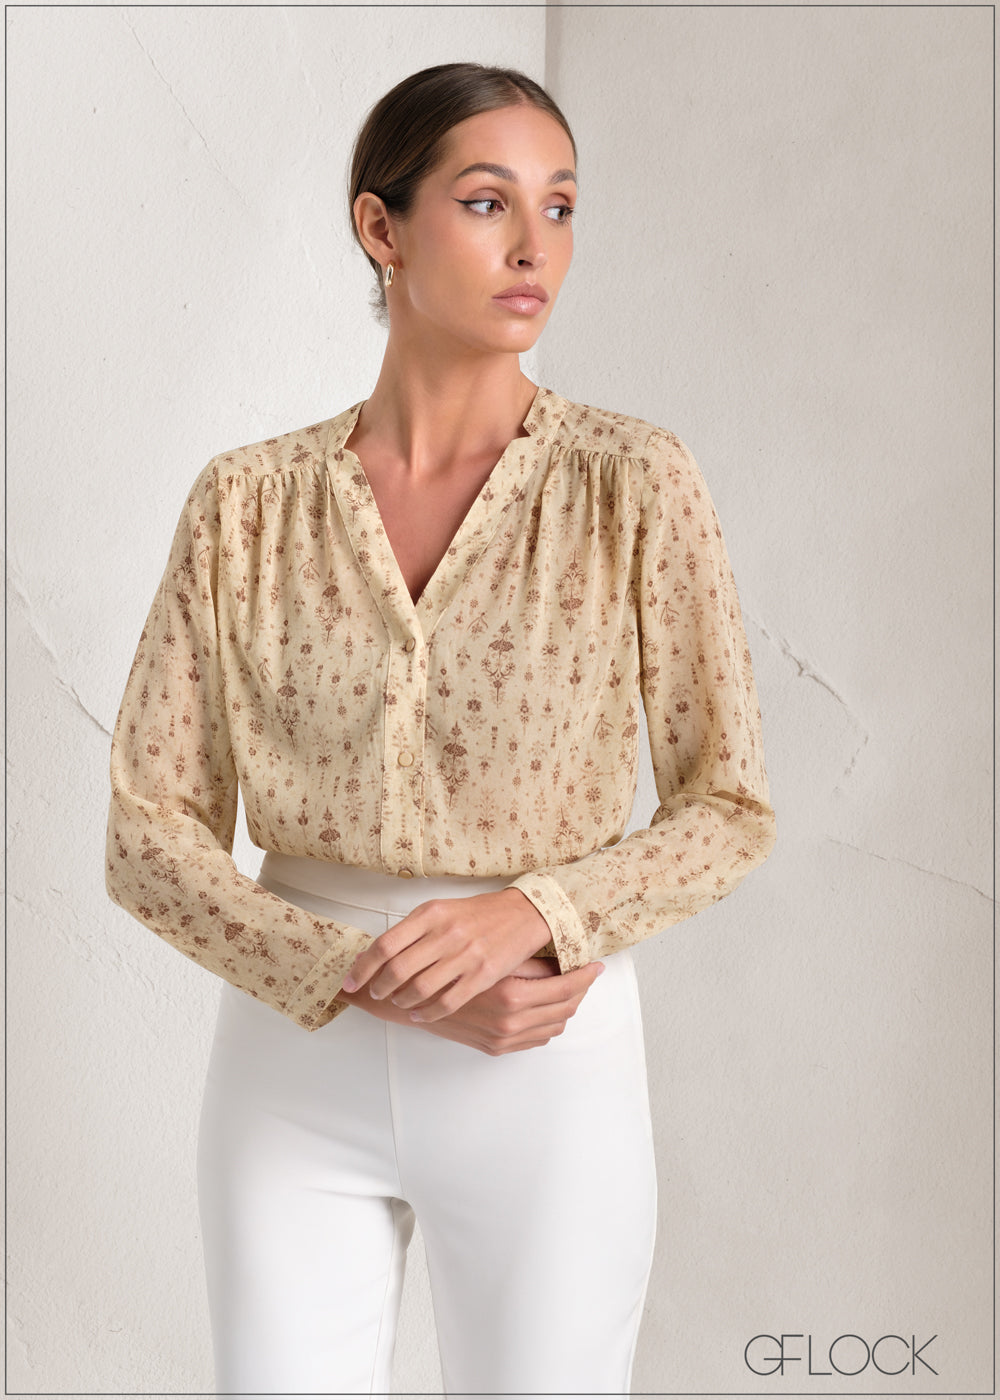 Printed Blouse With Notch Neck Detail - 061223